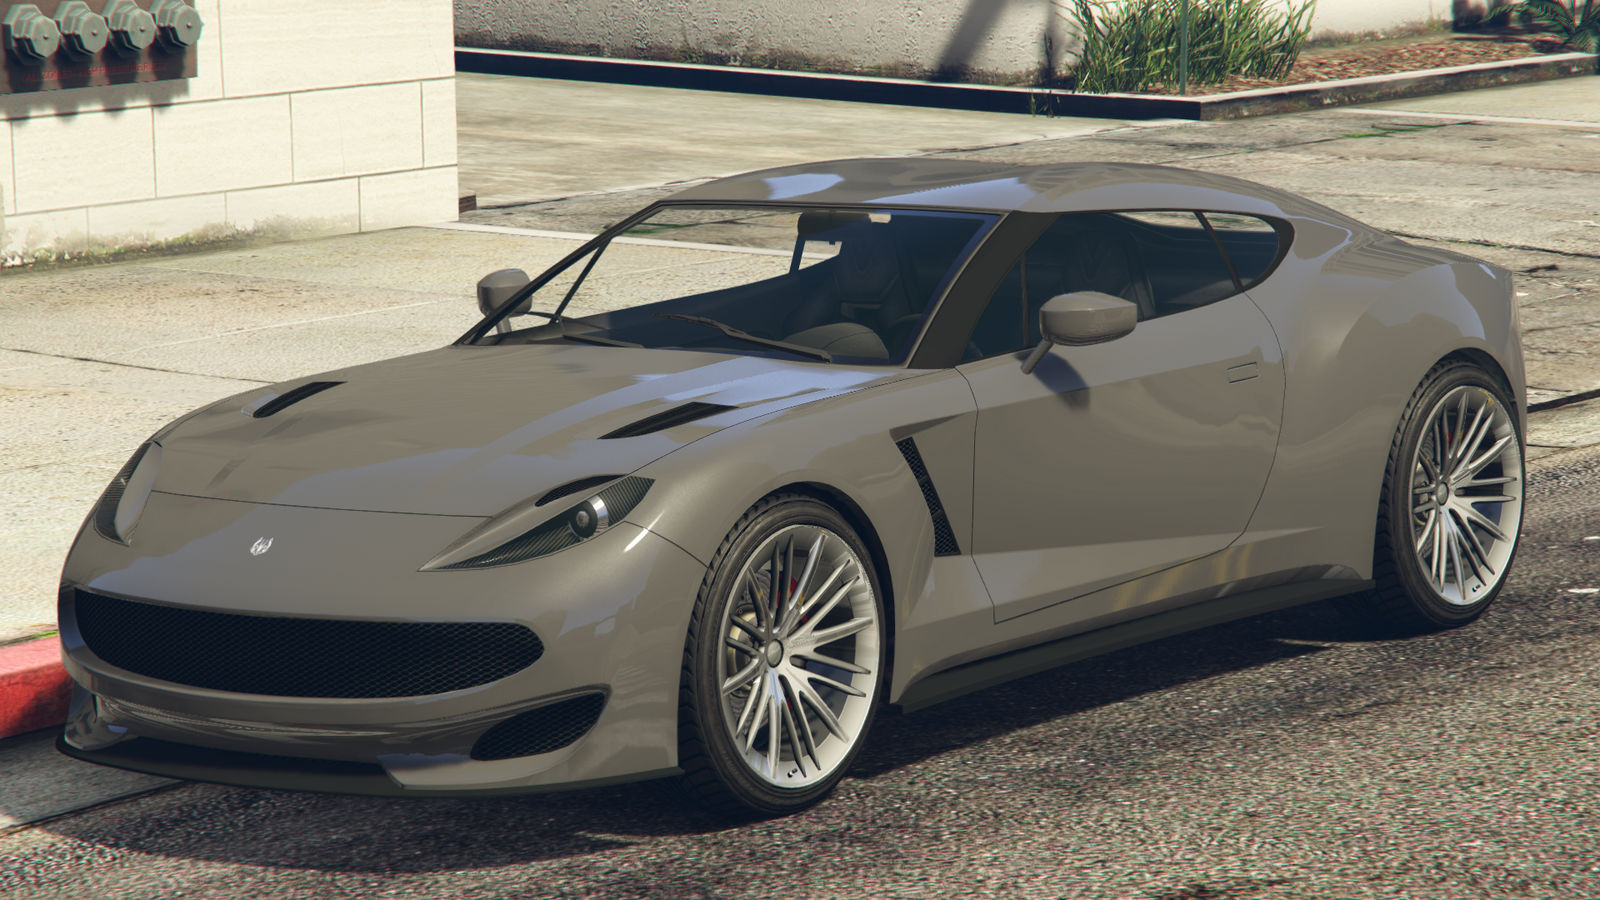 The Best & Fastest Sports Cars in GTA Online & GTA 5 (2023): Ranked by Class